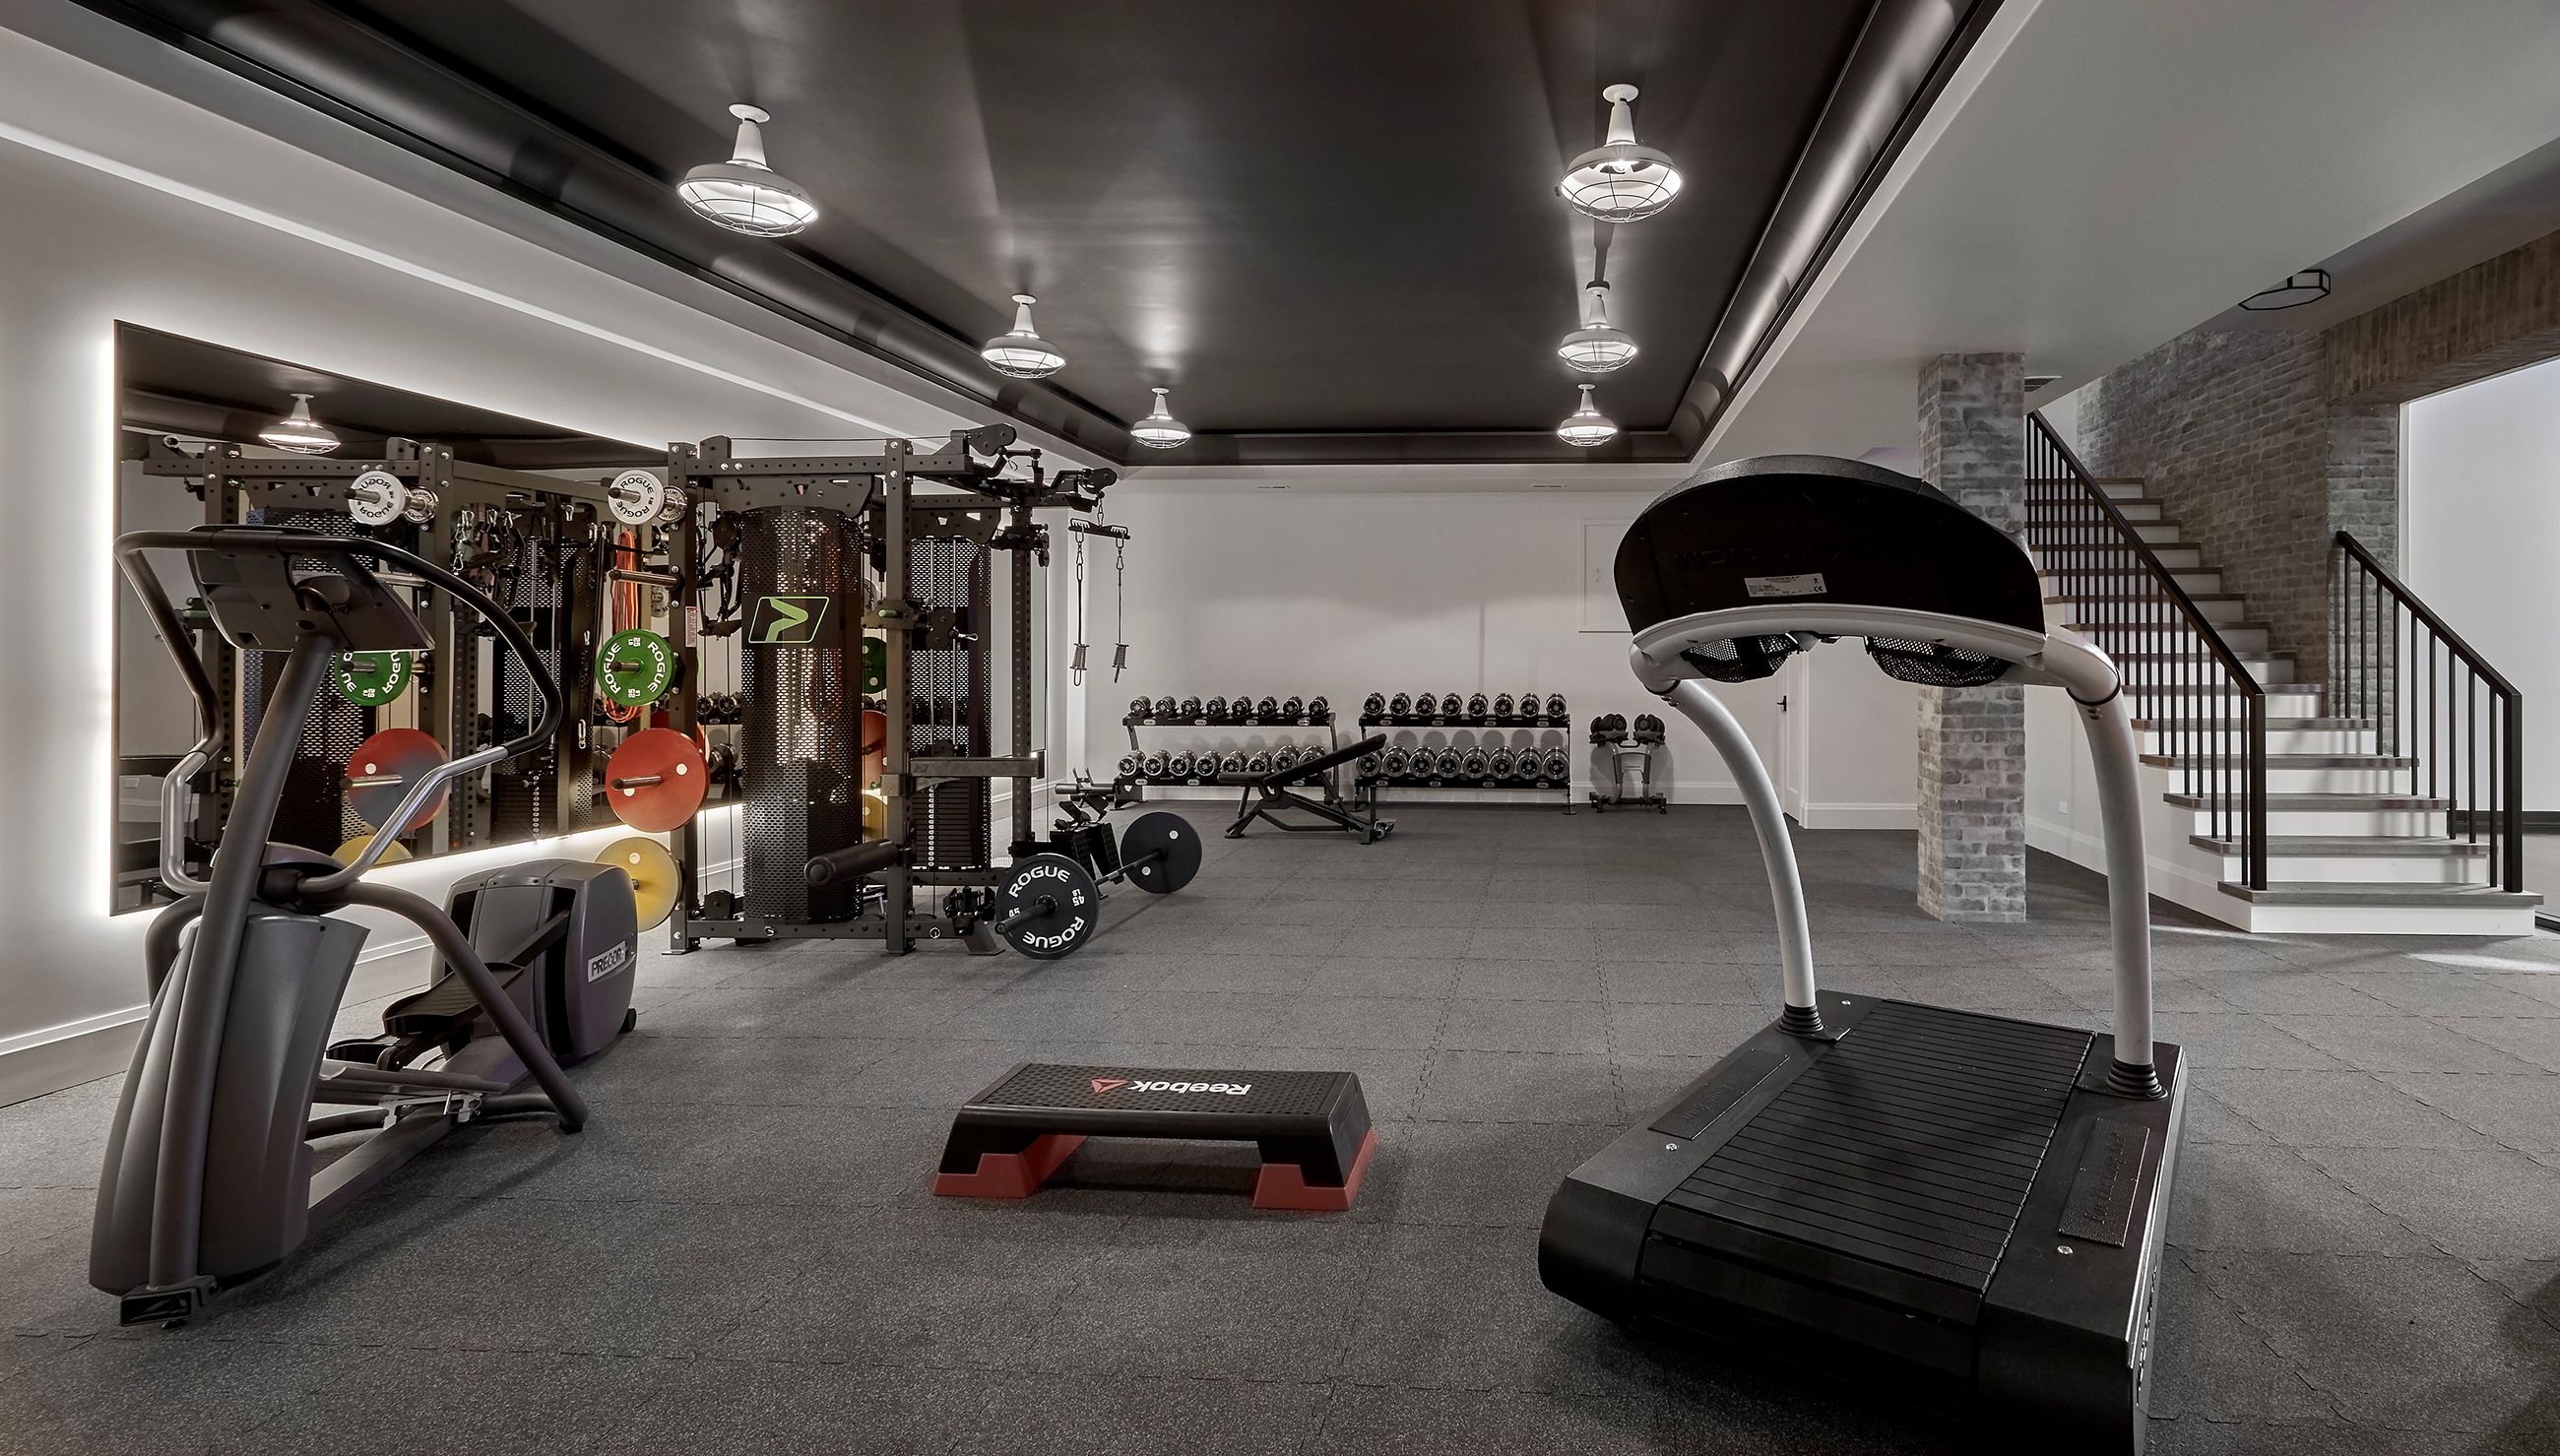 Need Durable Flooring for Your Home Gym or Workshop. Consider These 6 Solutions